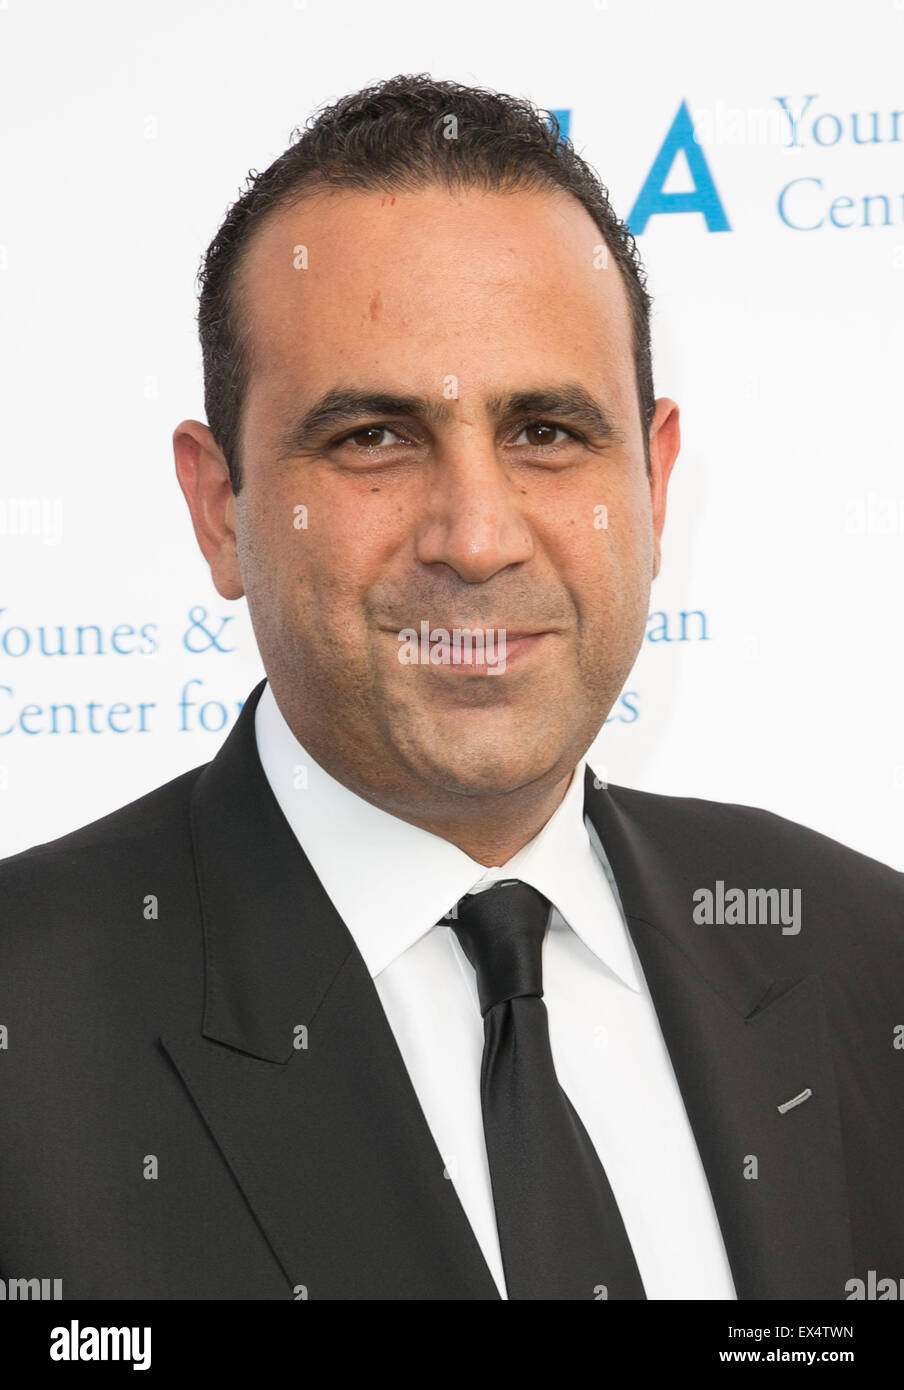 UCLA Younes & Soraya Nazarian Center for Israel Studies 5th Annual Gala held at Wallis Annenberg Center for the Performing Arts  Featuring: Sam Nazarian Where: Los Angeles, California, United States When: 05 May 2015 C Stock Photo